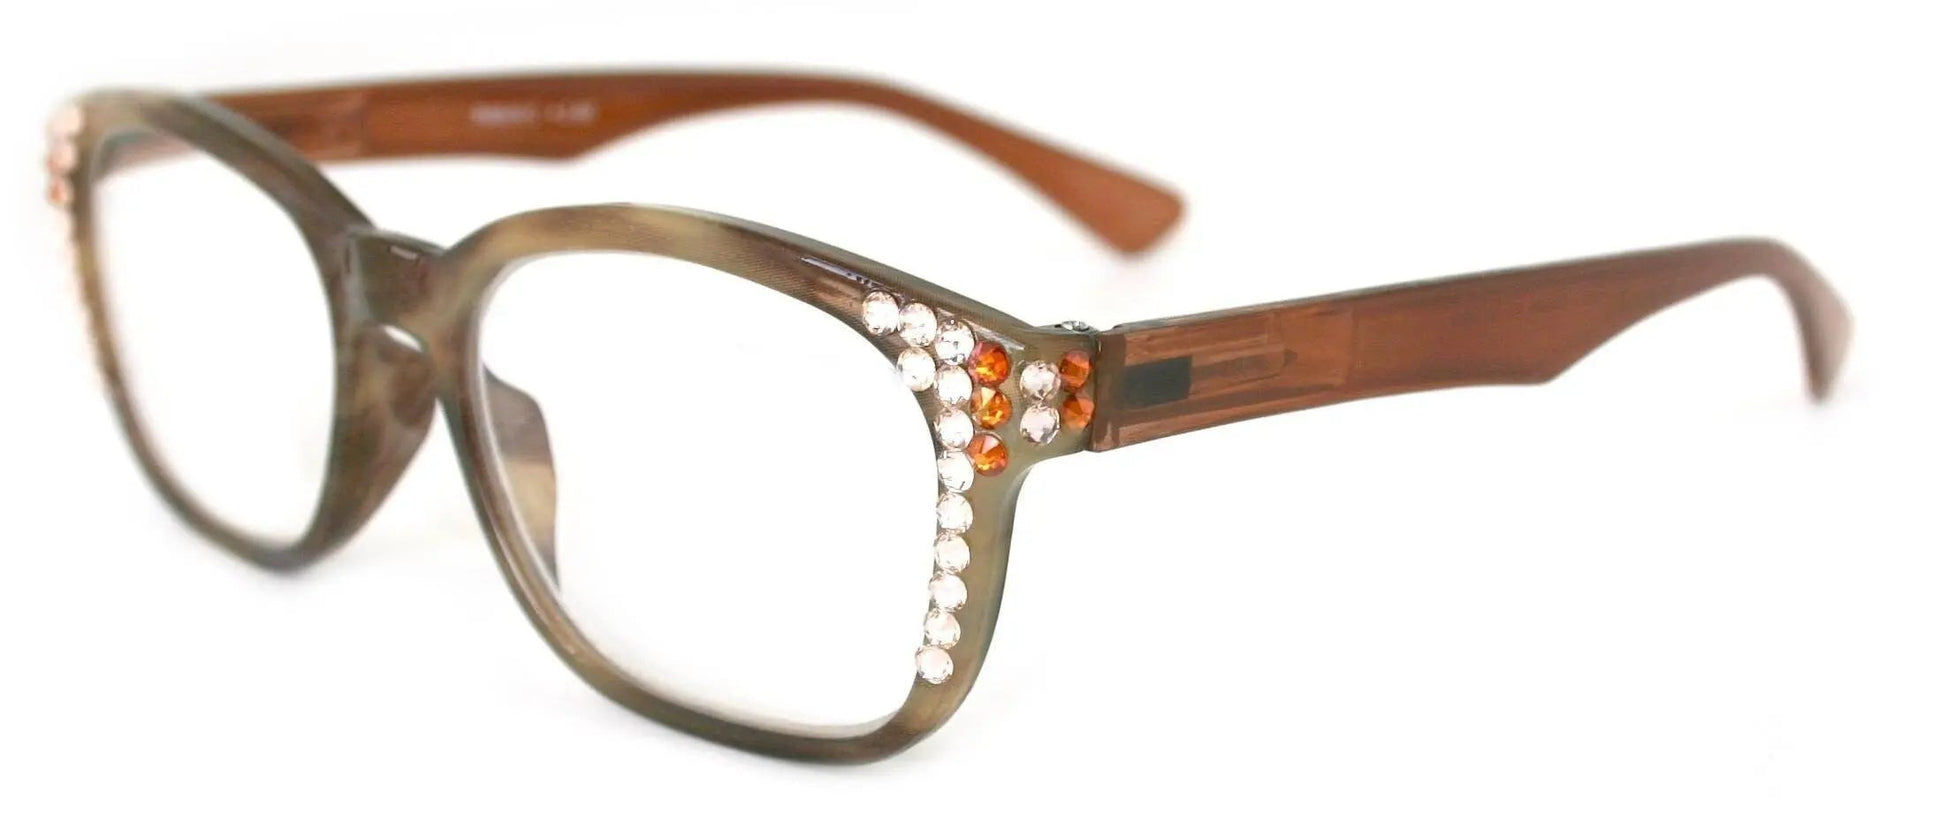 Coral, (Bling) Reading Glasses For Women W (Cooper, Light Colorado)Genuine European Crystals.  Marble Pattern Frame. NY Fifth Avenue. 